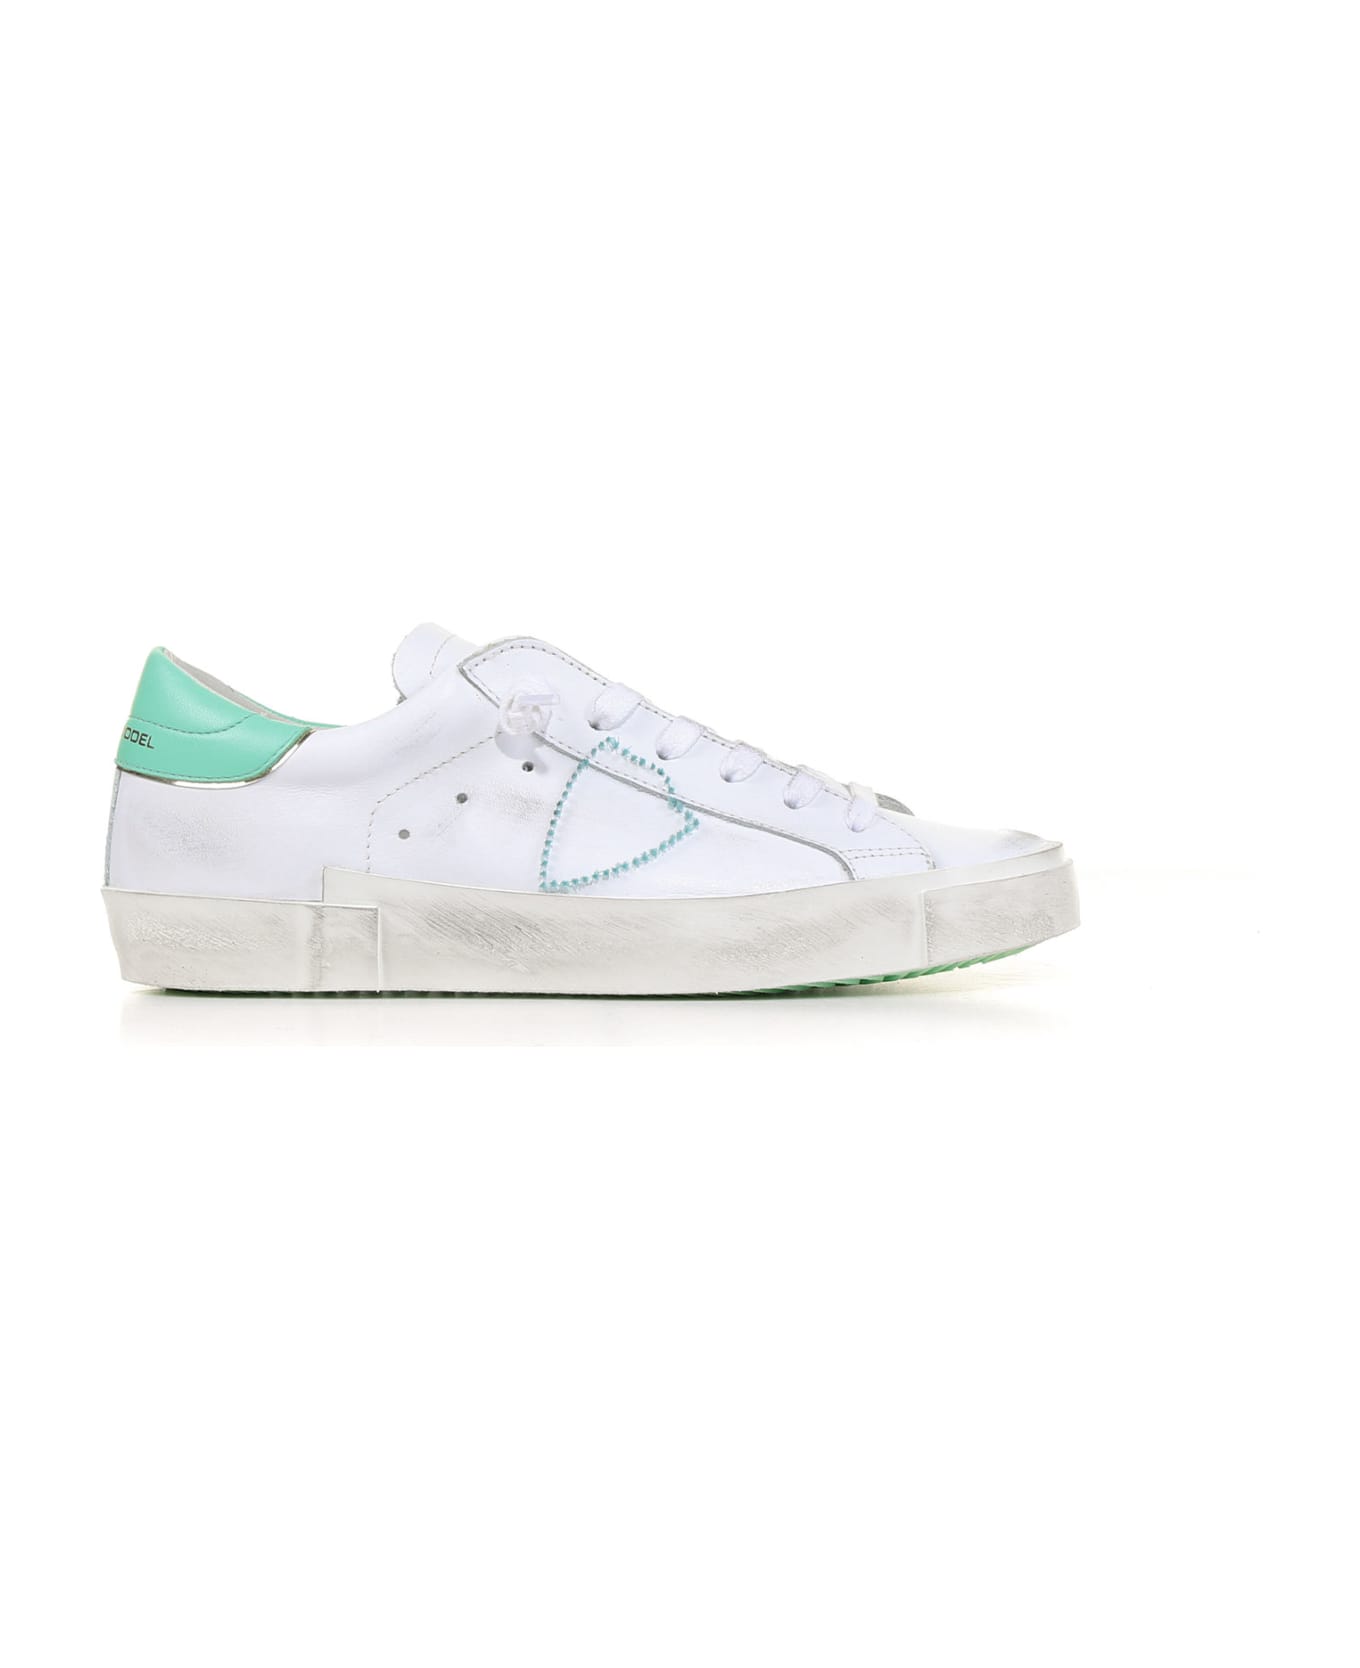 Philippe Model Sneaker With Contrasting Details - BIANCO TIFFANY